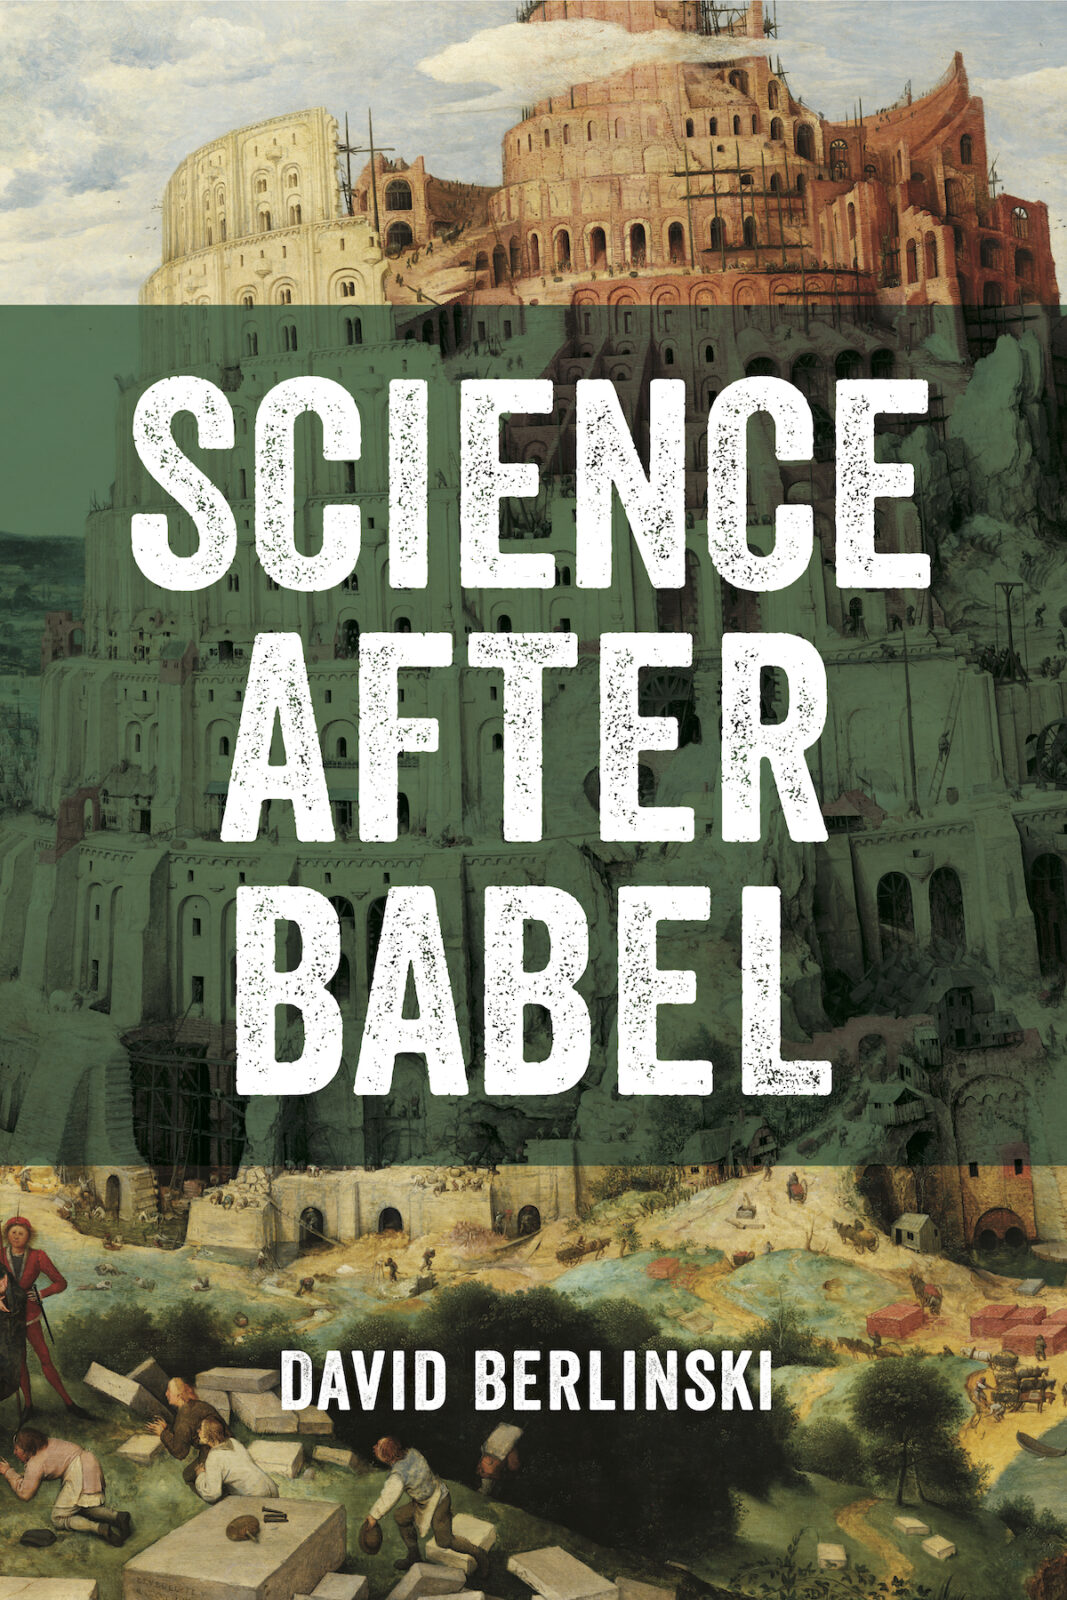 Science After Babel  Discovery Institute